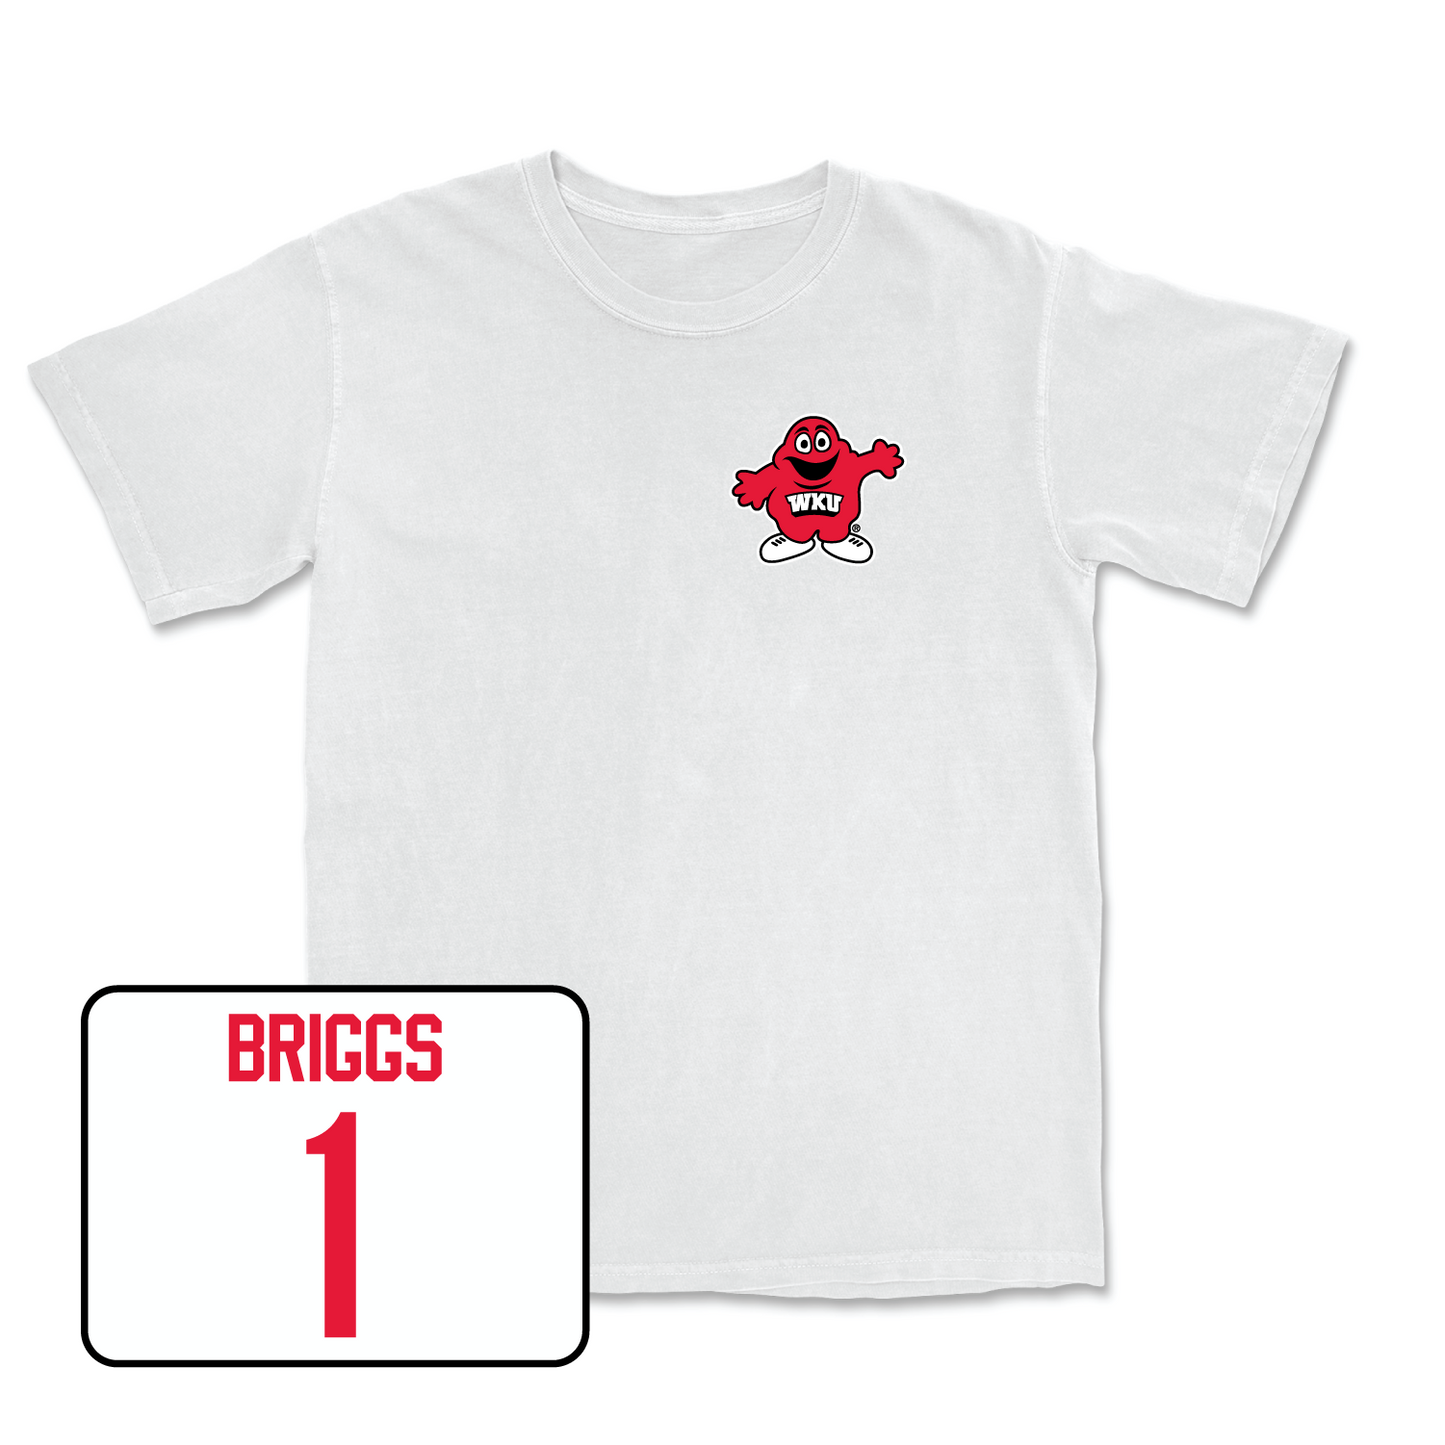 White Women's Volleyball Big Red Comfort Colors Tee Medium / Paige Briggs | #1